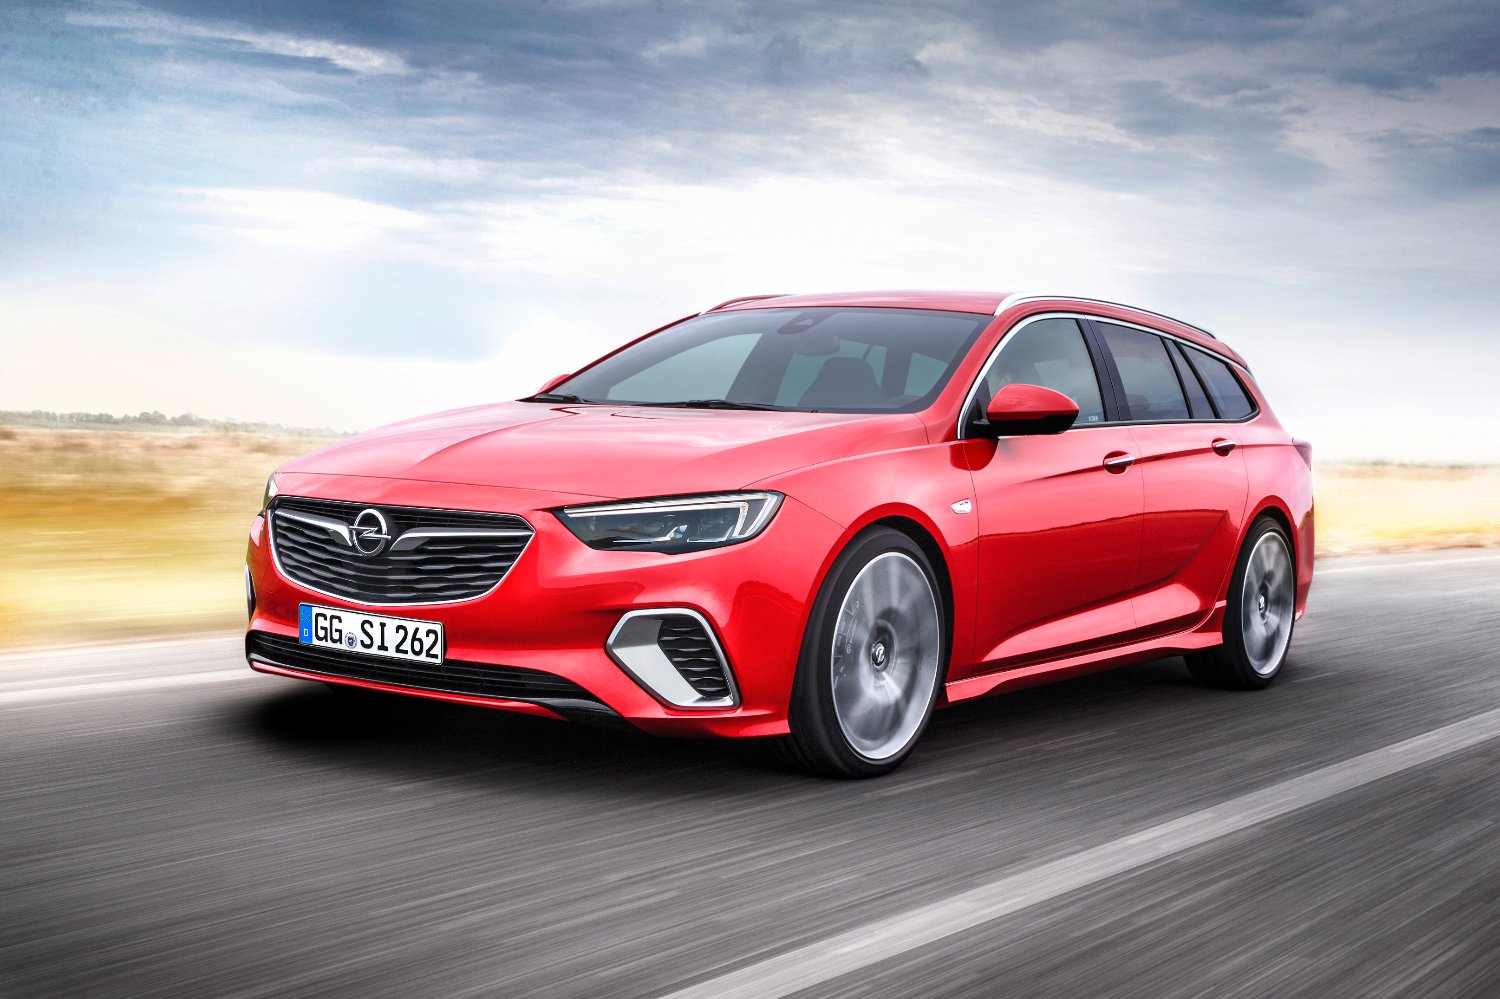 Sharp, powerful, Opel Insignia GSi Sports Tourer: The sporty, uncompromising station wagon